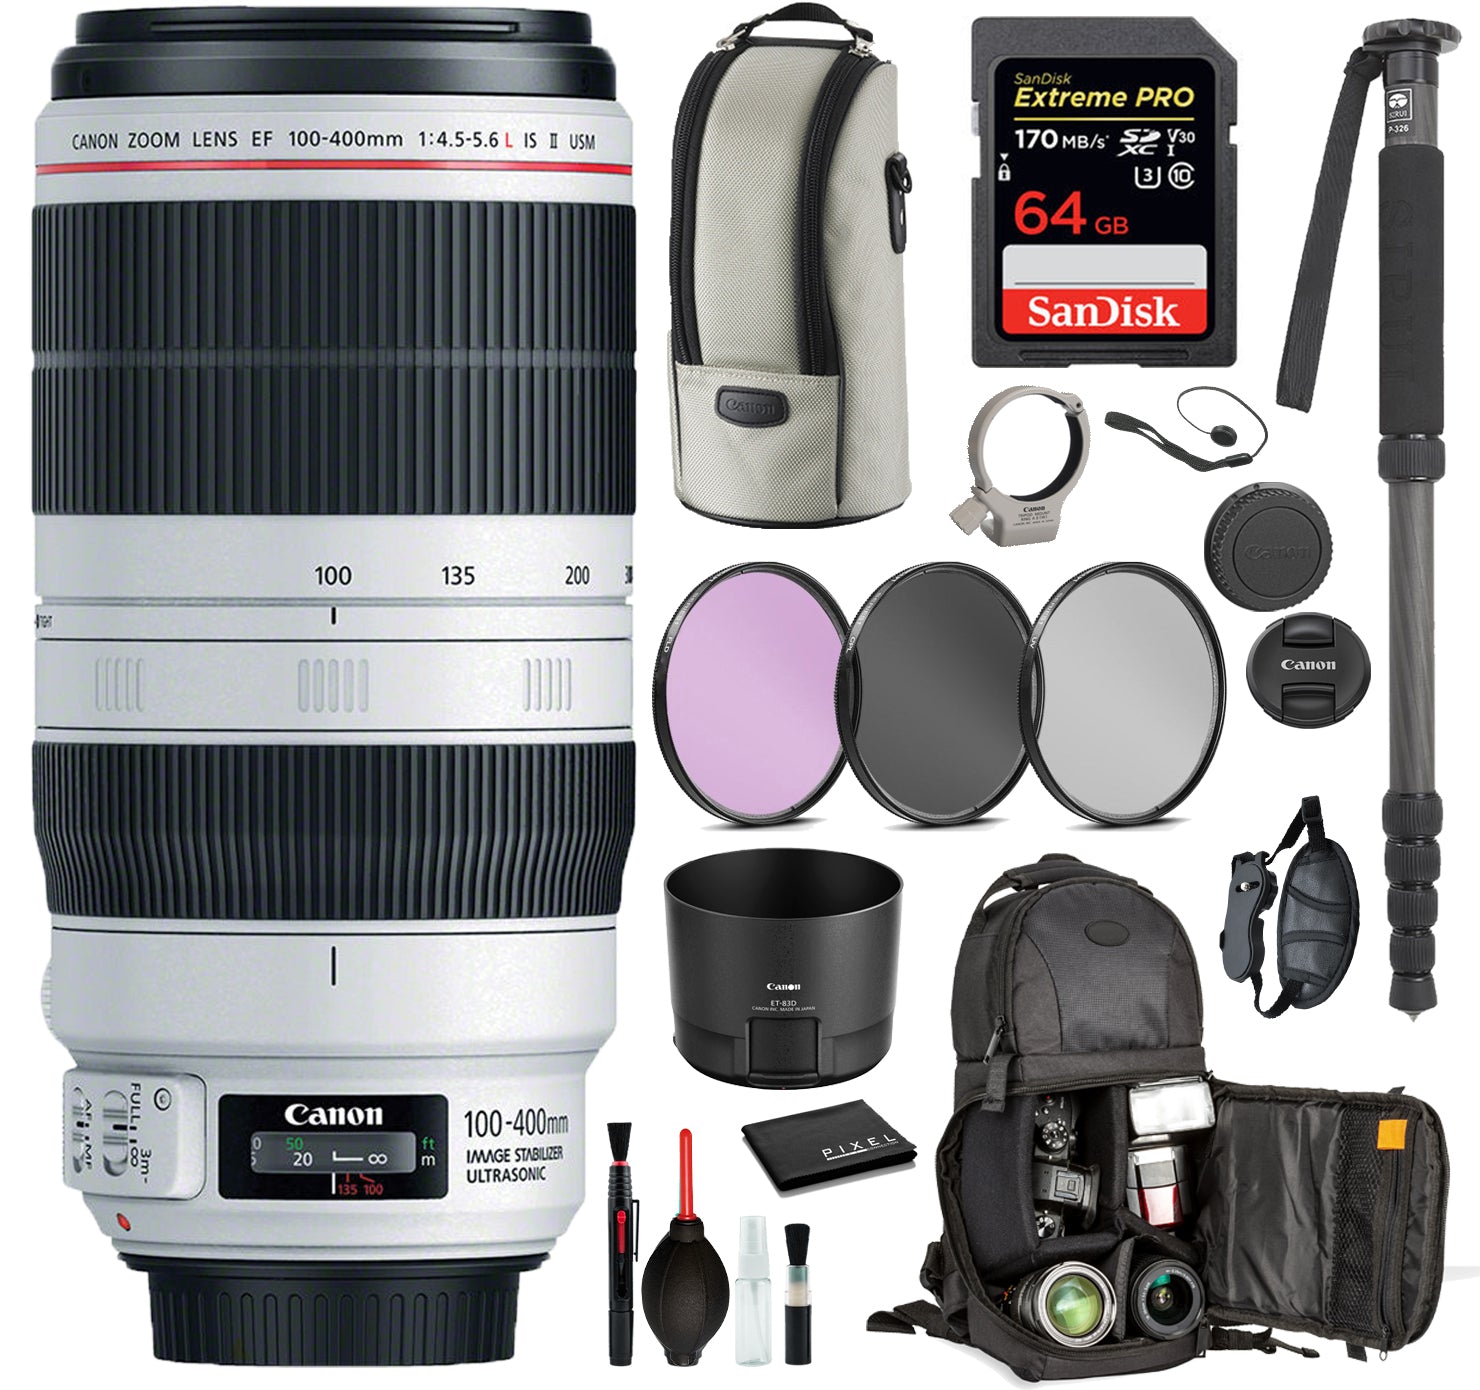 Canon EF 100-400mm f/4.5-5.6L IS II USM Lens  (9524B002)  Includes: 9PC filter Kit, Sandisk 64GB Extreme SD Card + More